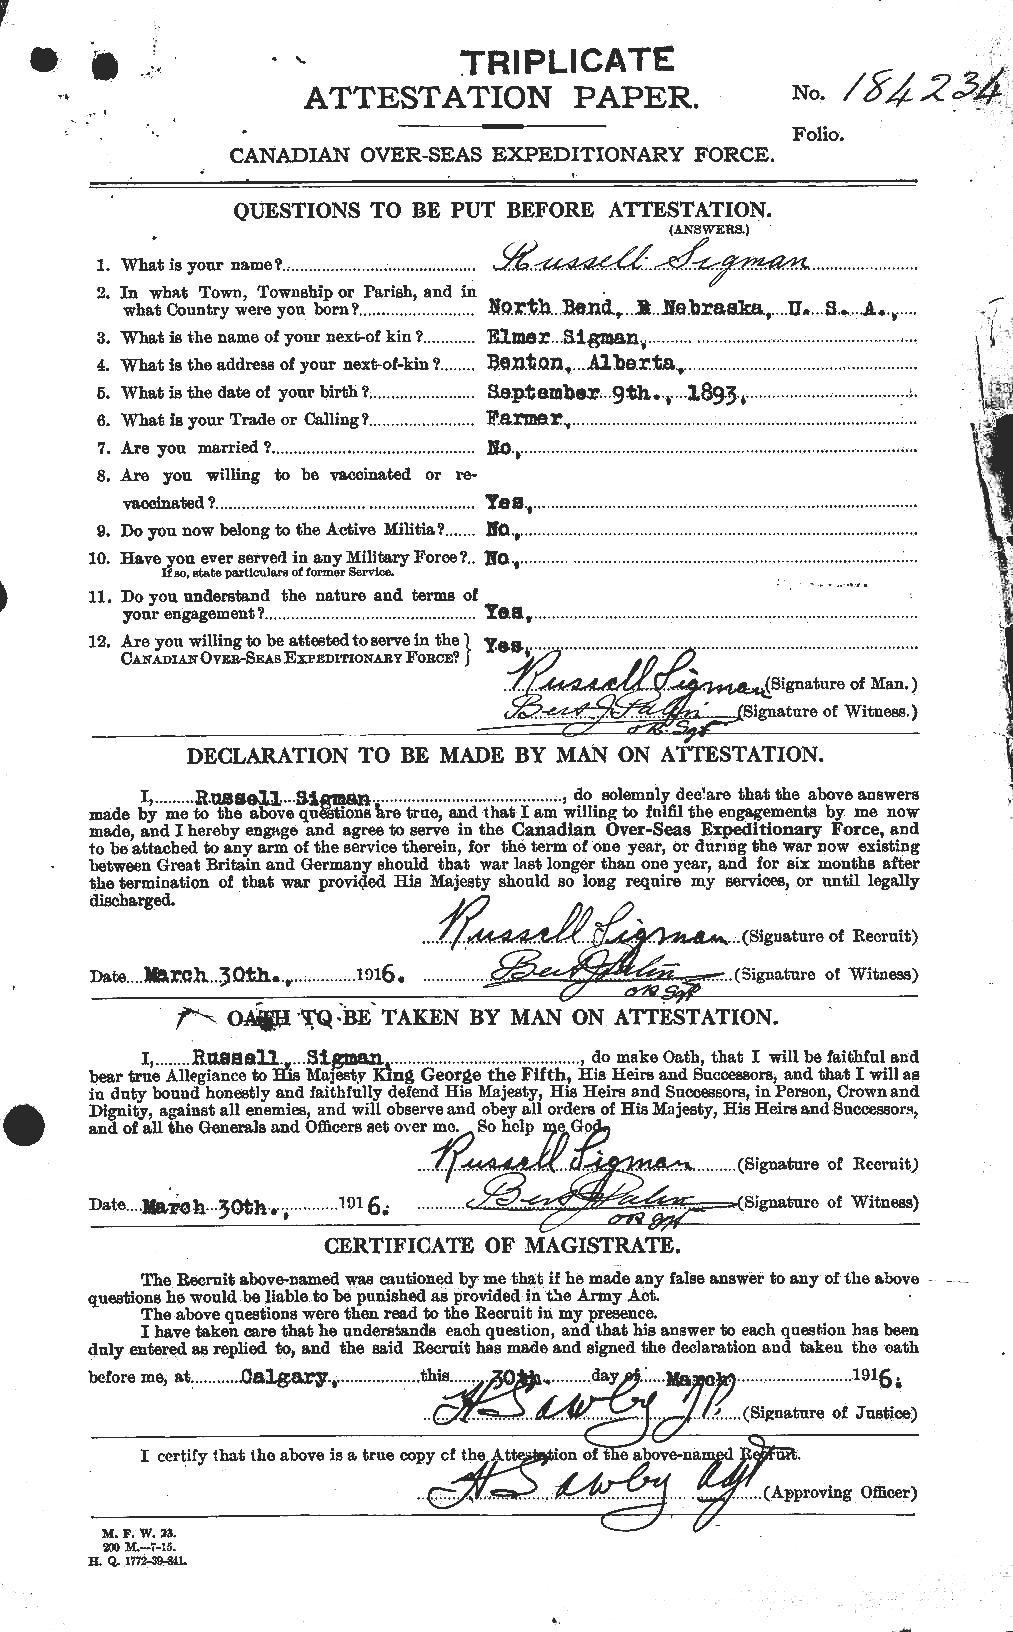 Personnel Records of the First World War - CEF 094540a